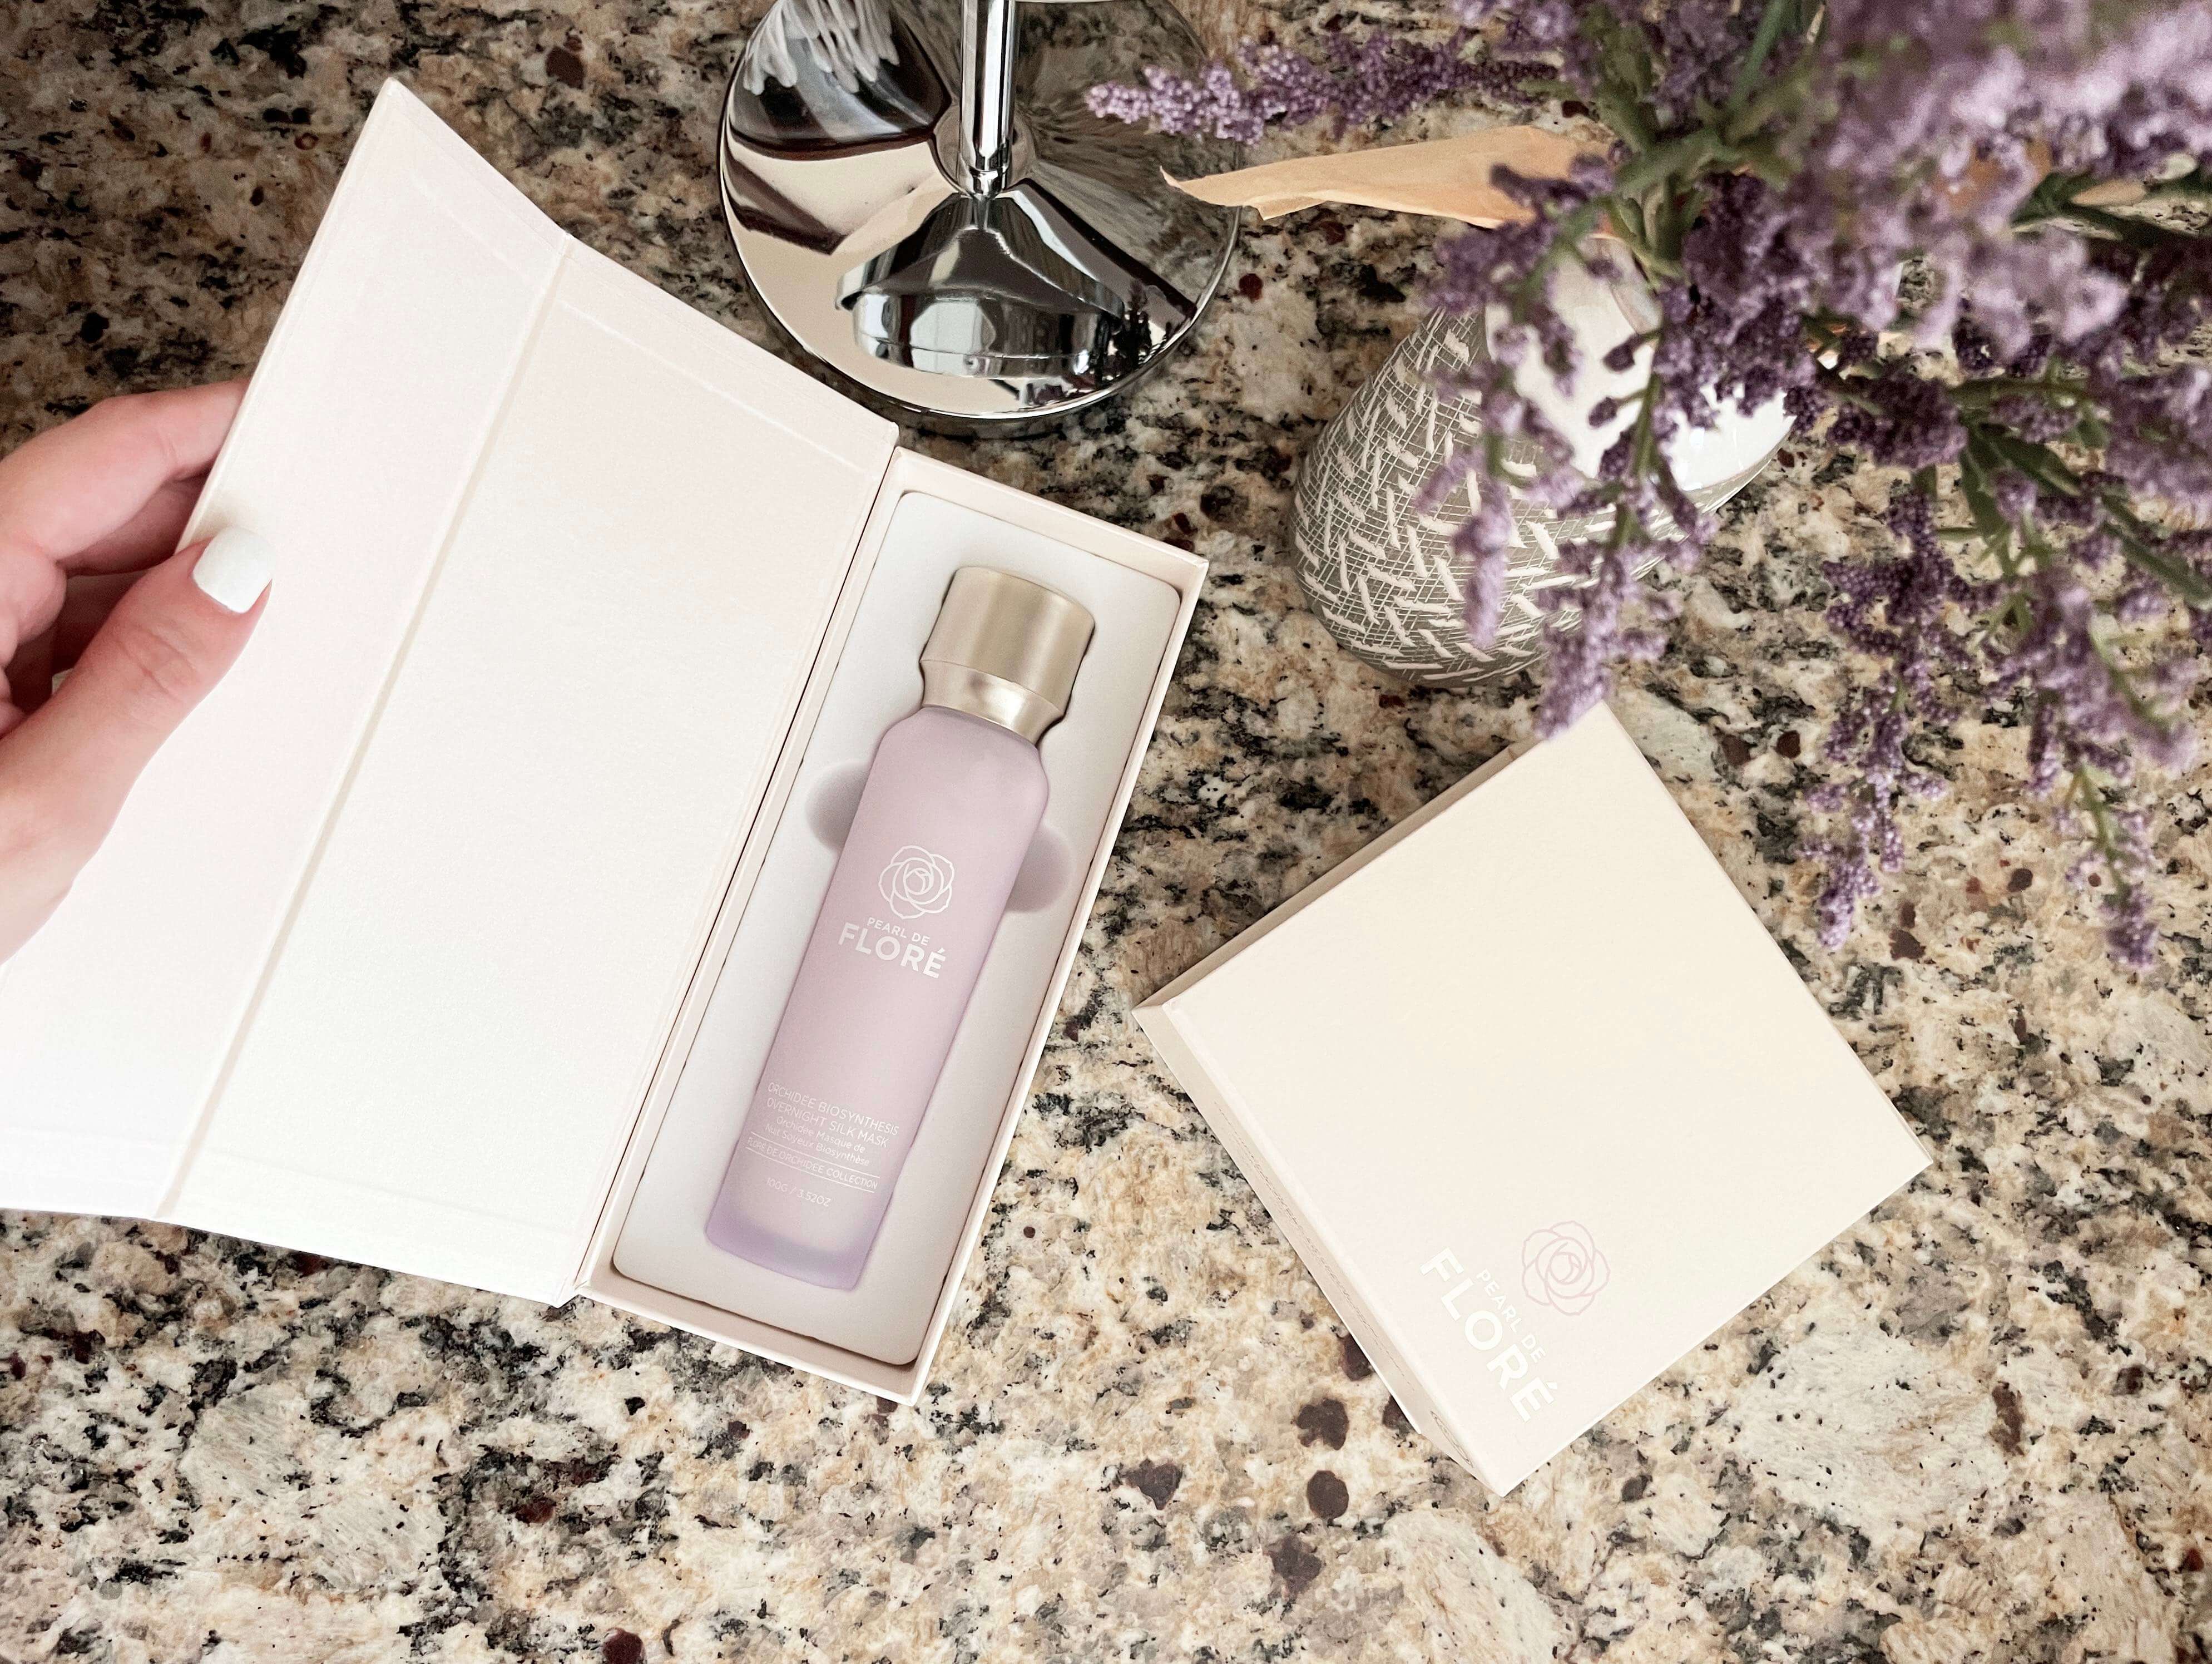 Here’s What I Thought of the Flore de Orchidee Brightening Collection from Pearl de Flore